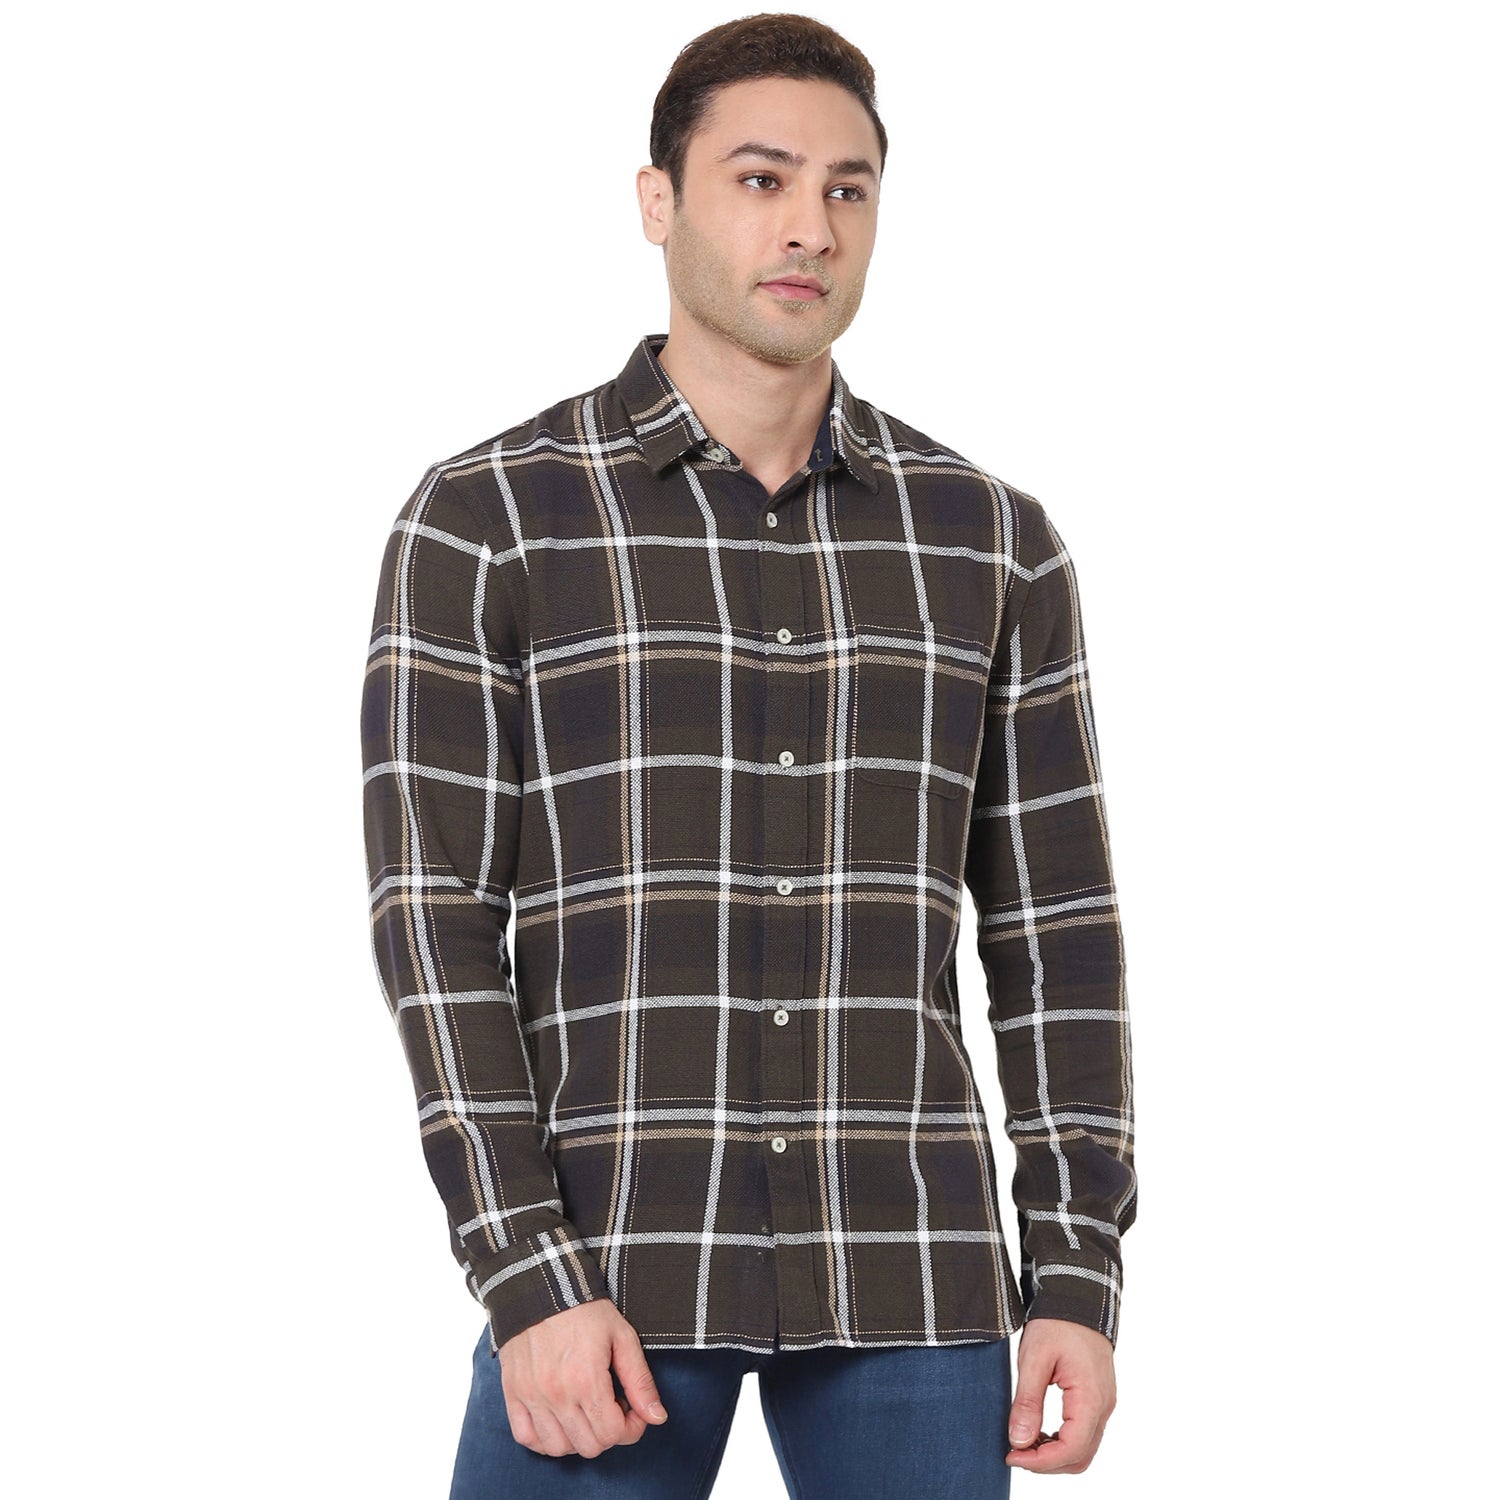 Olive Green and White Checked Cotton Casual Shirt (VARACE)